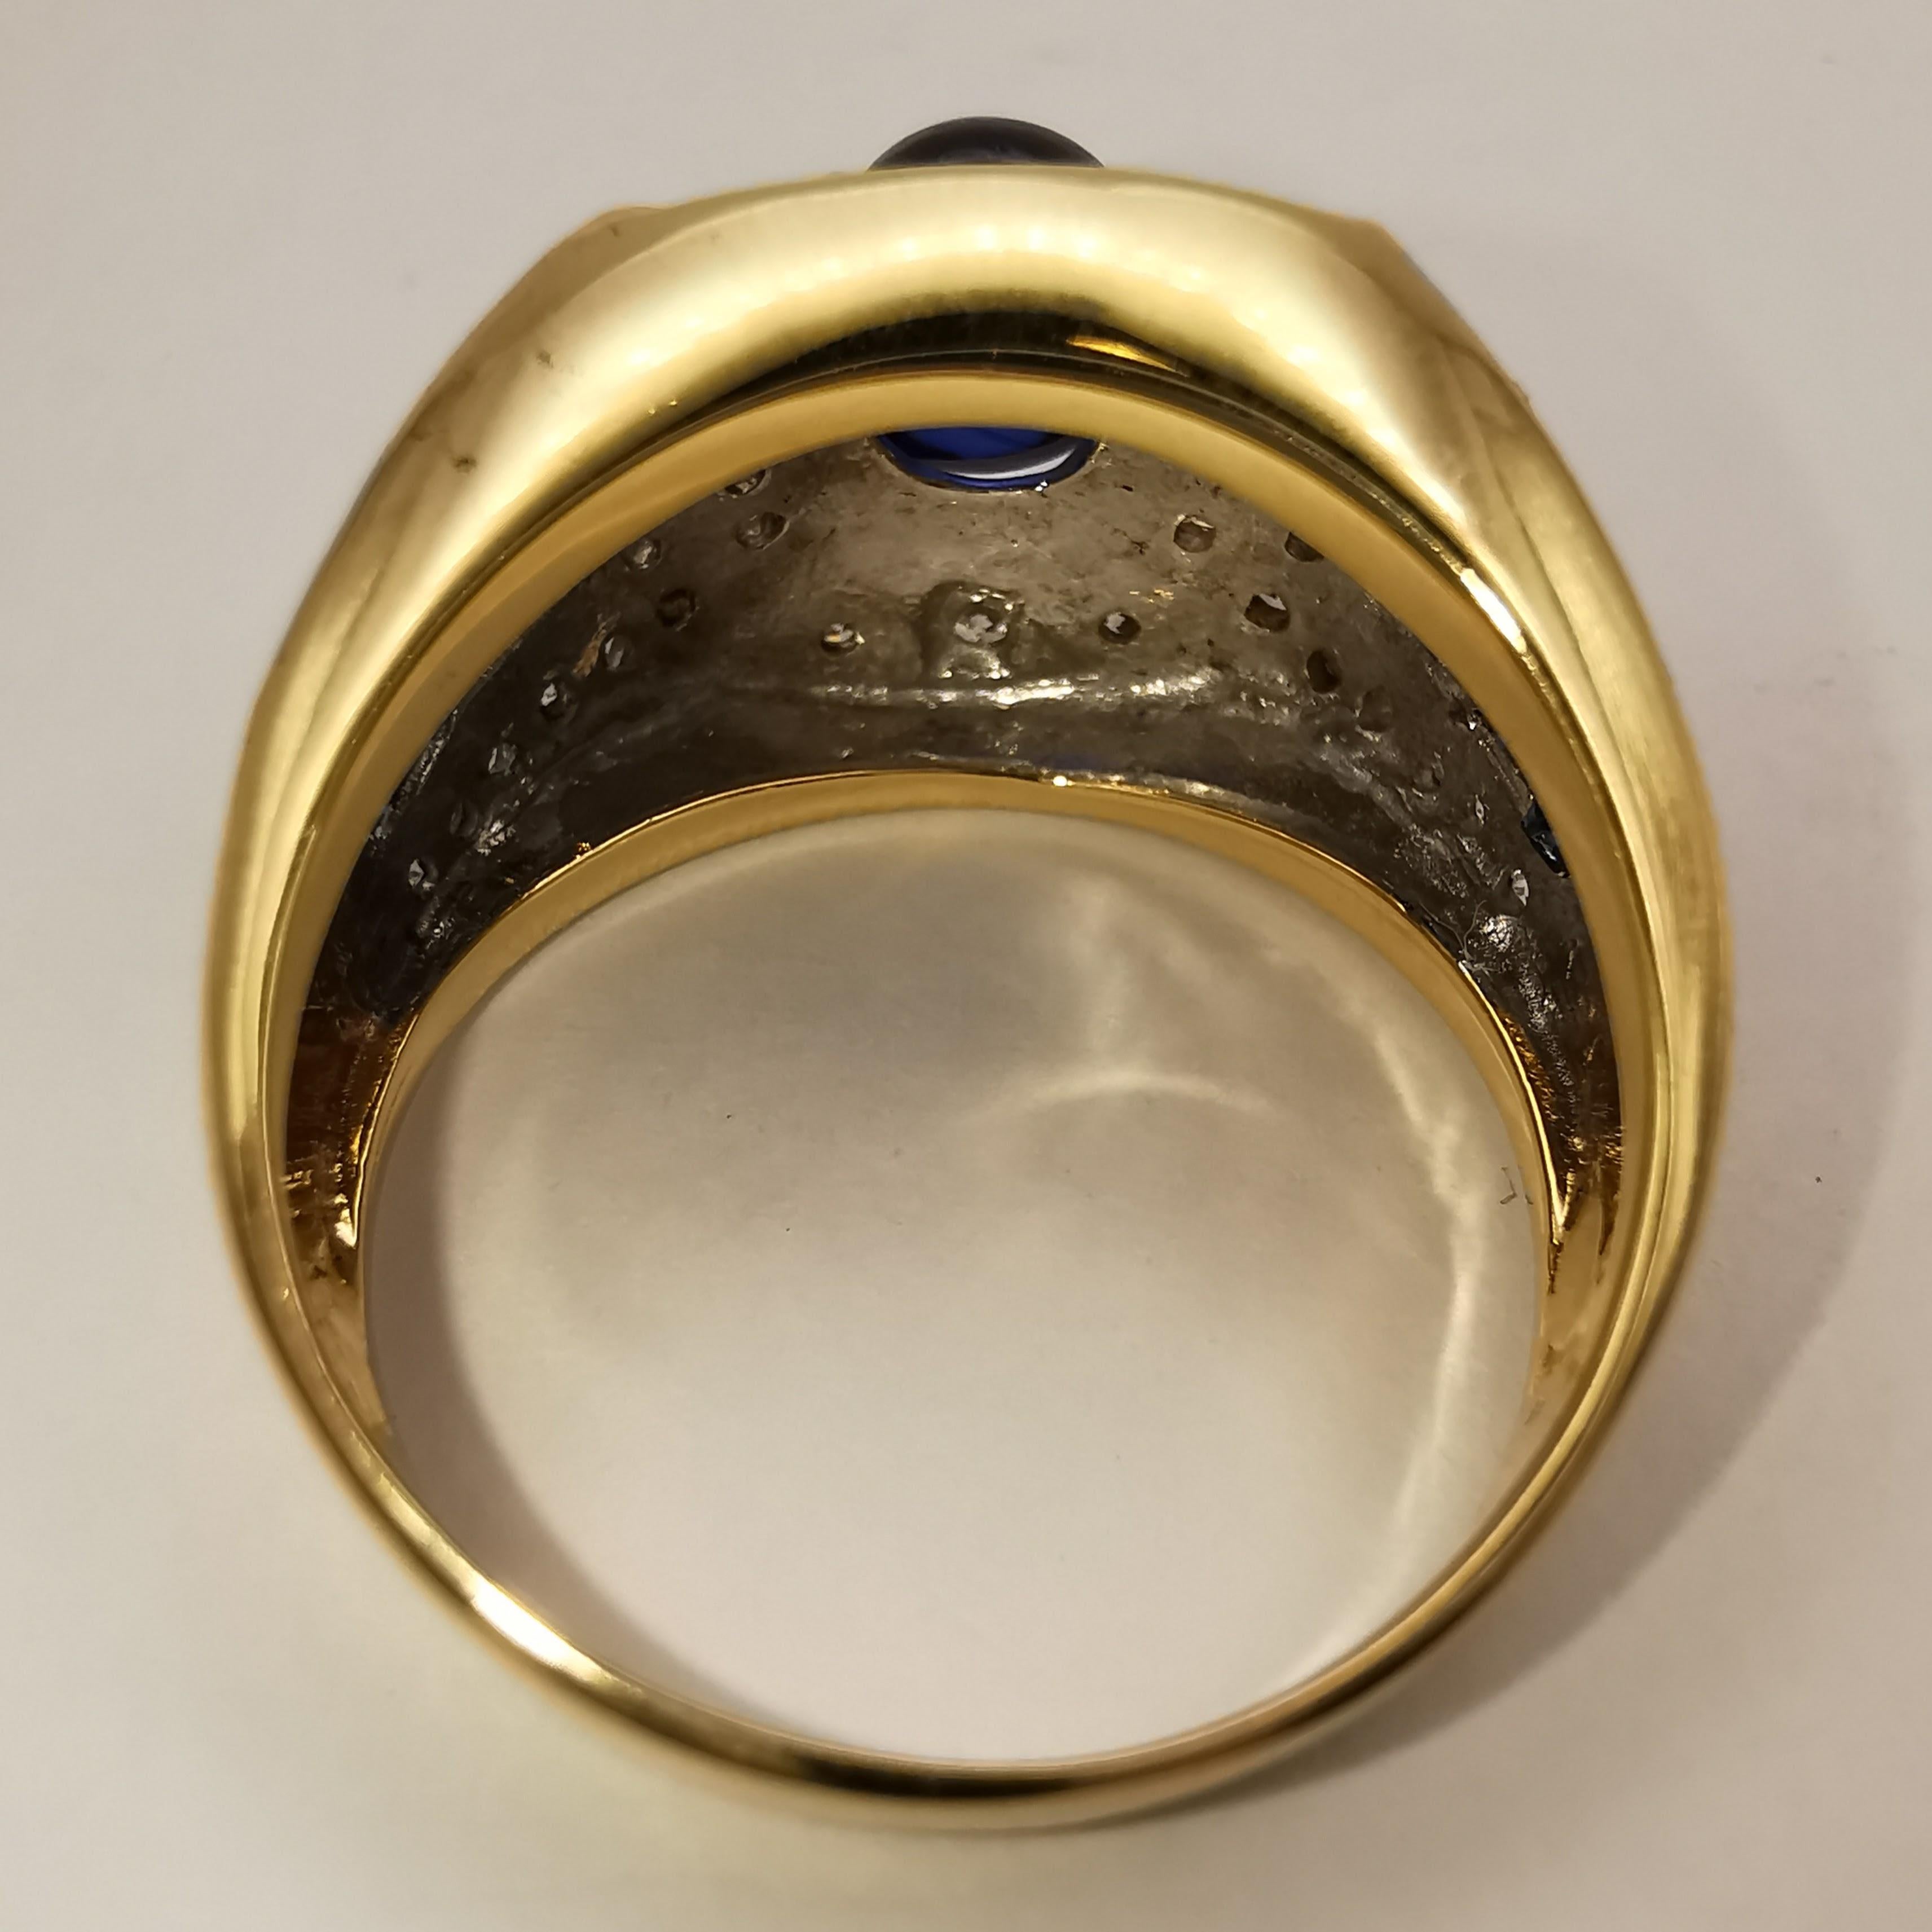 2.11ct Oval Cabochon Royal Blue Sapphire Diamond Art Deco Men's Ring in 14k Gold 2